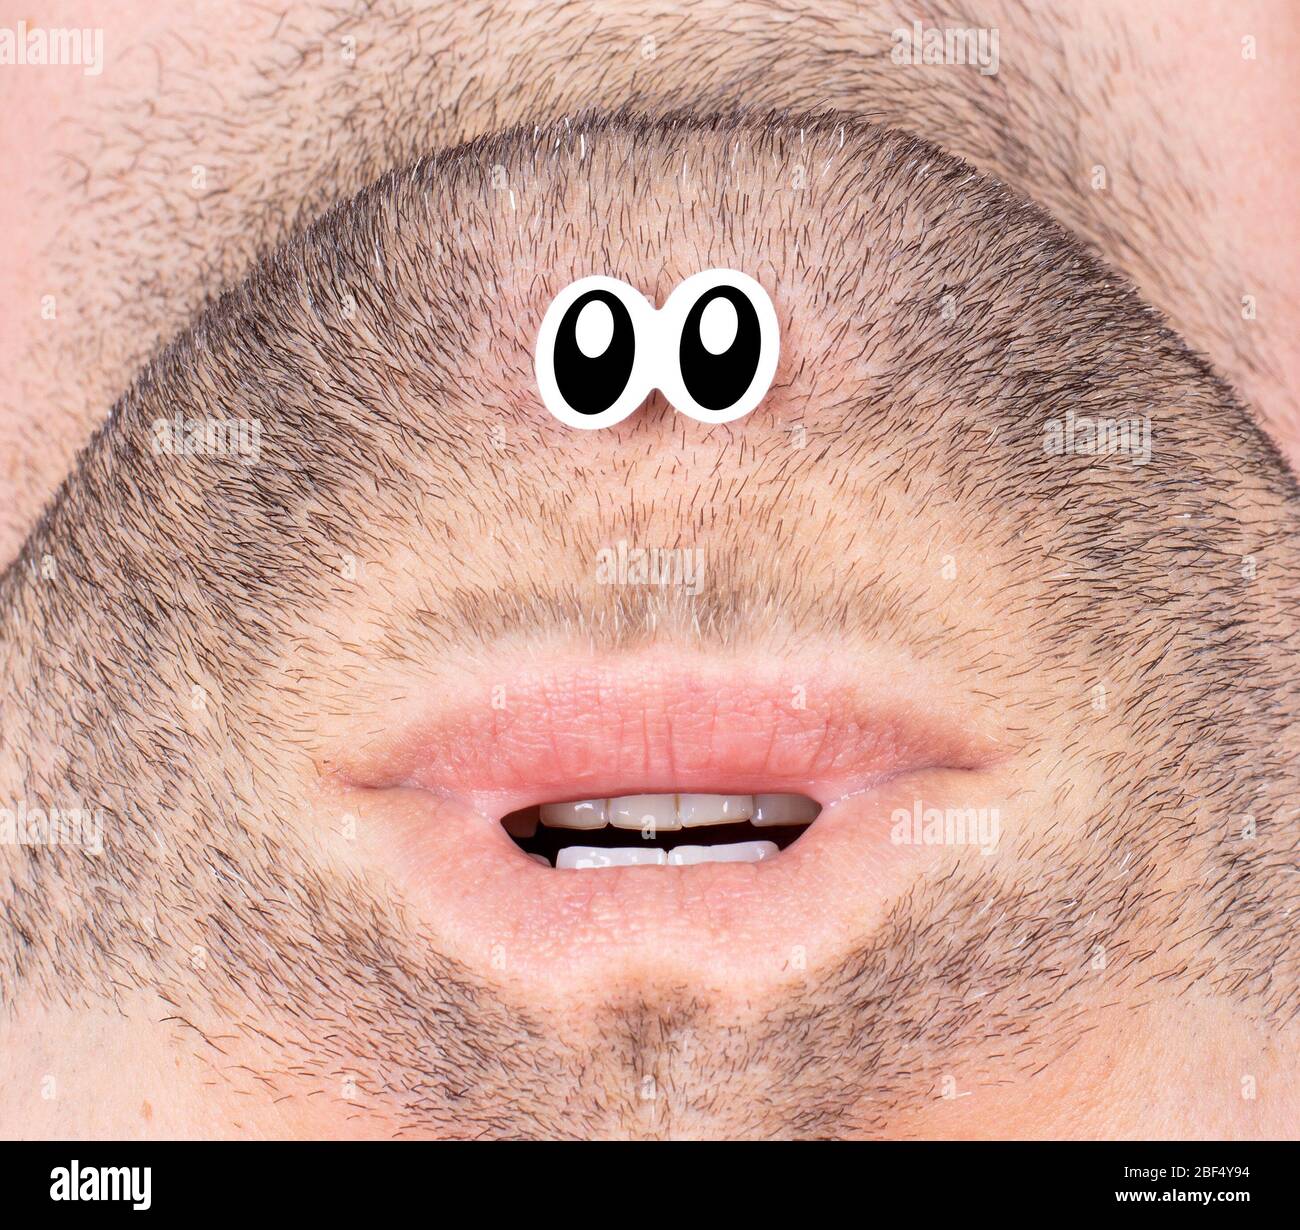 Funny image of a mouth and fake eyes - Weird looking character - Close-up Stock Photo